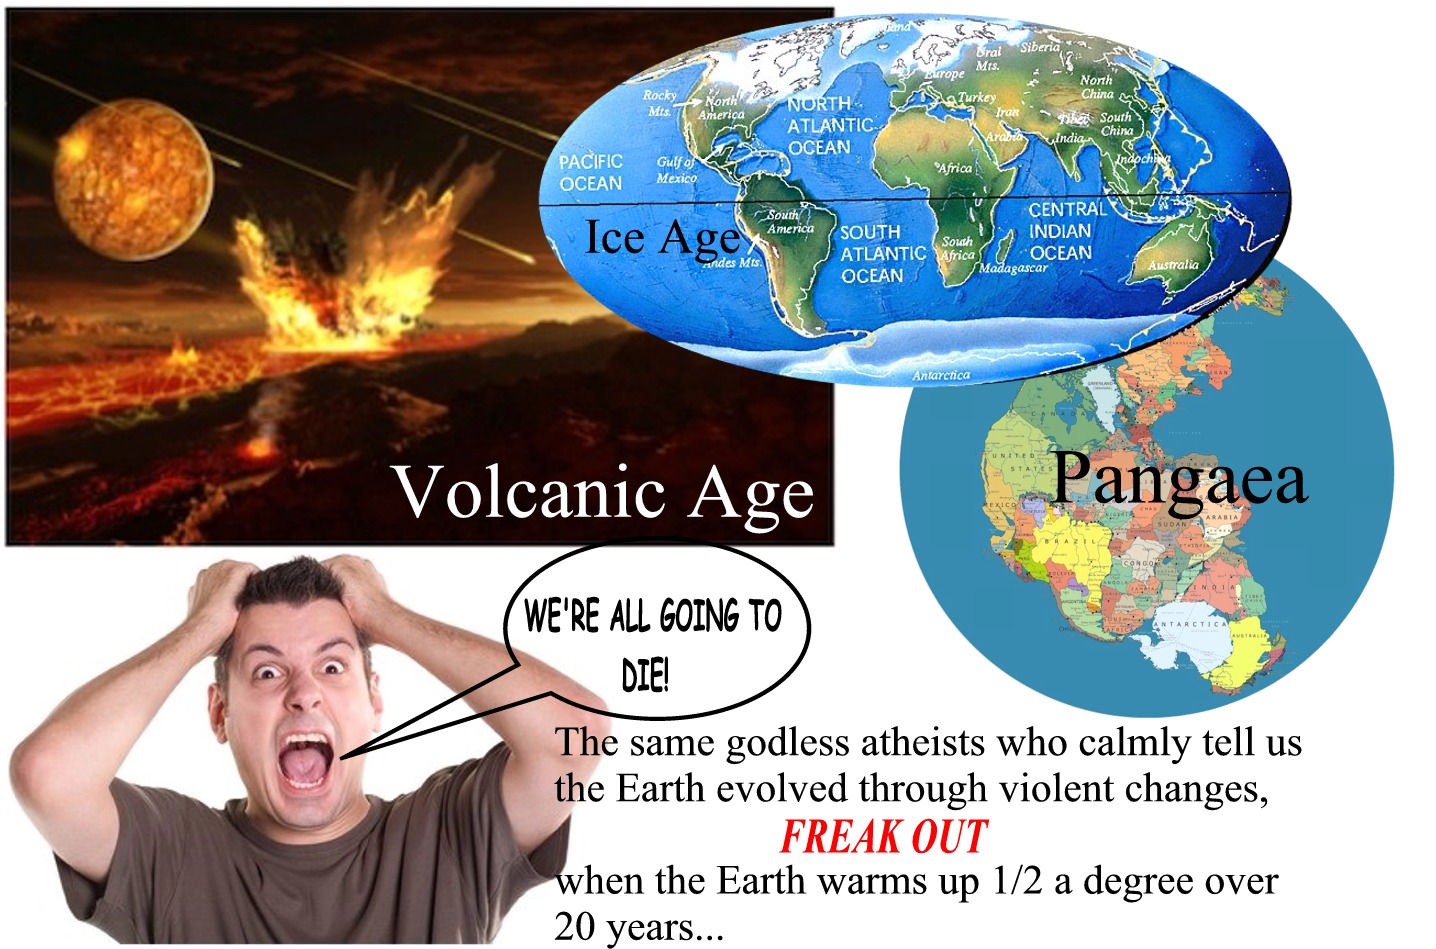 Oh my god the earth isn't 100 percent stable! We're all going to die!